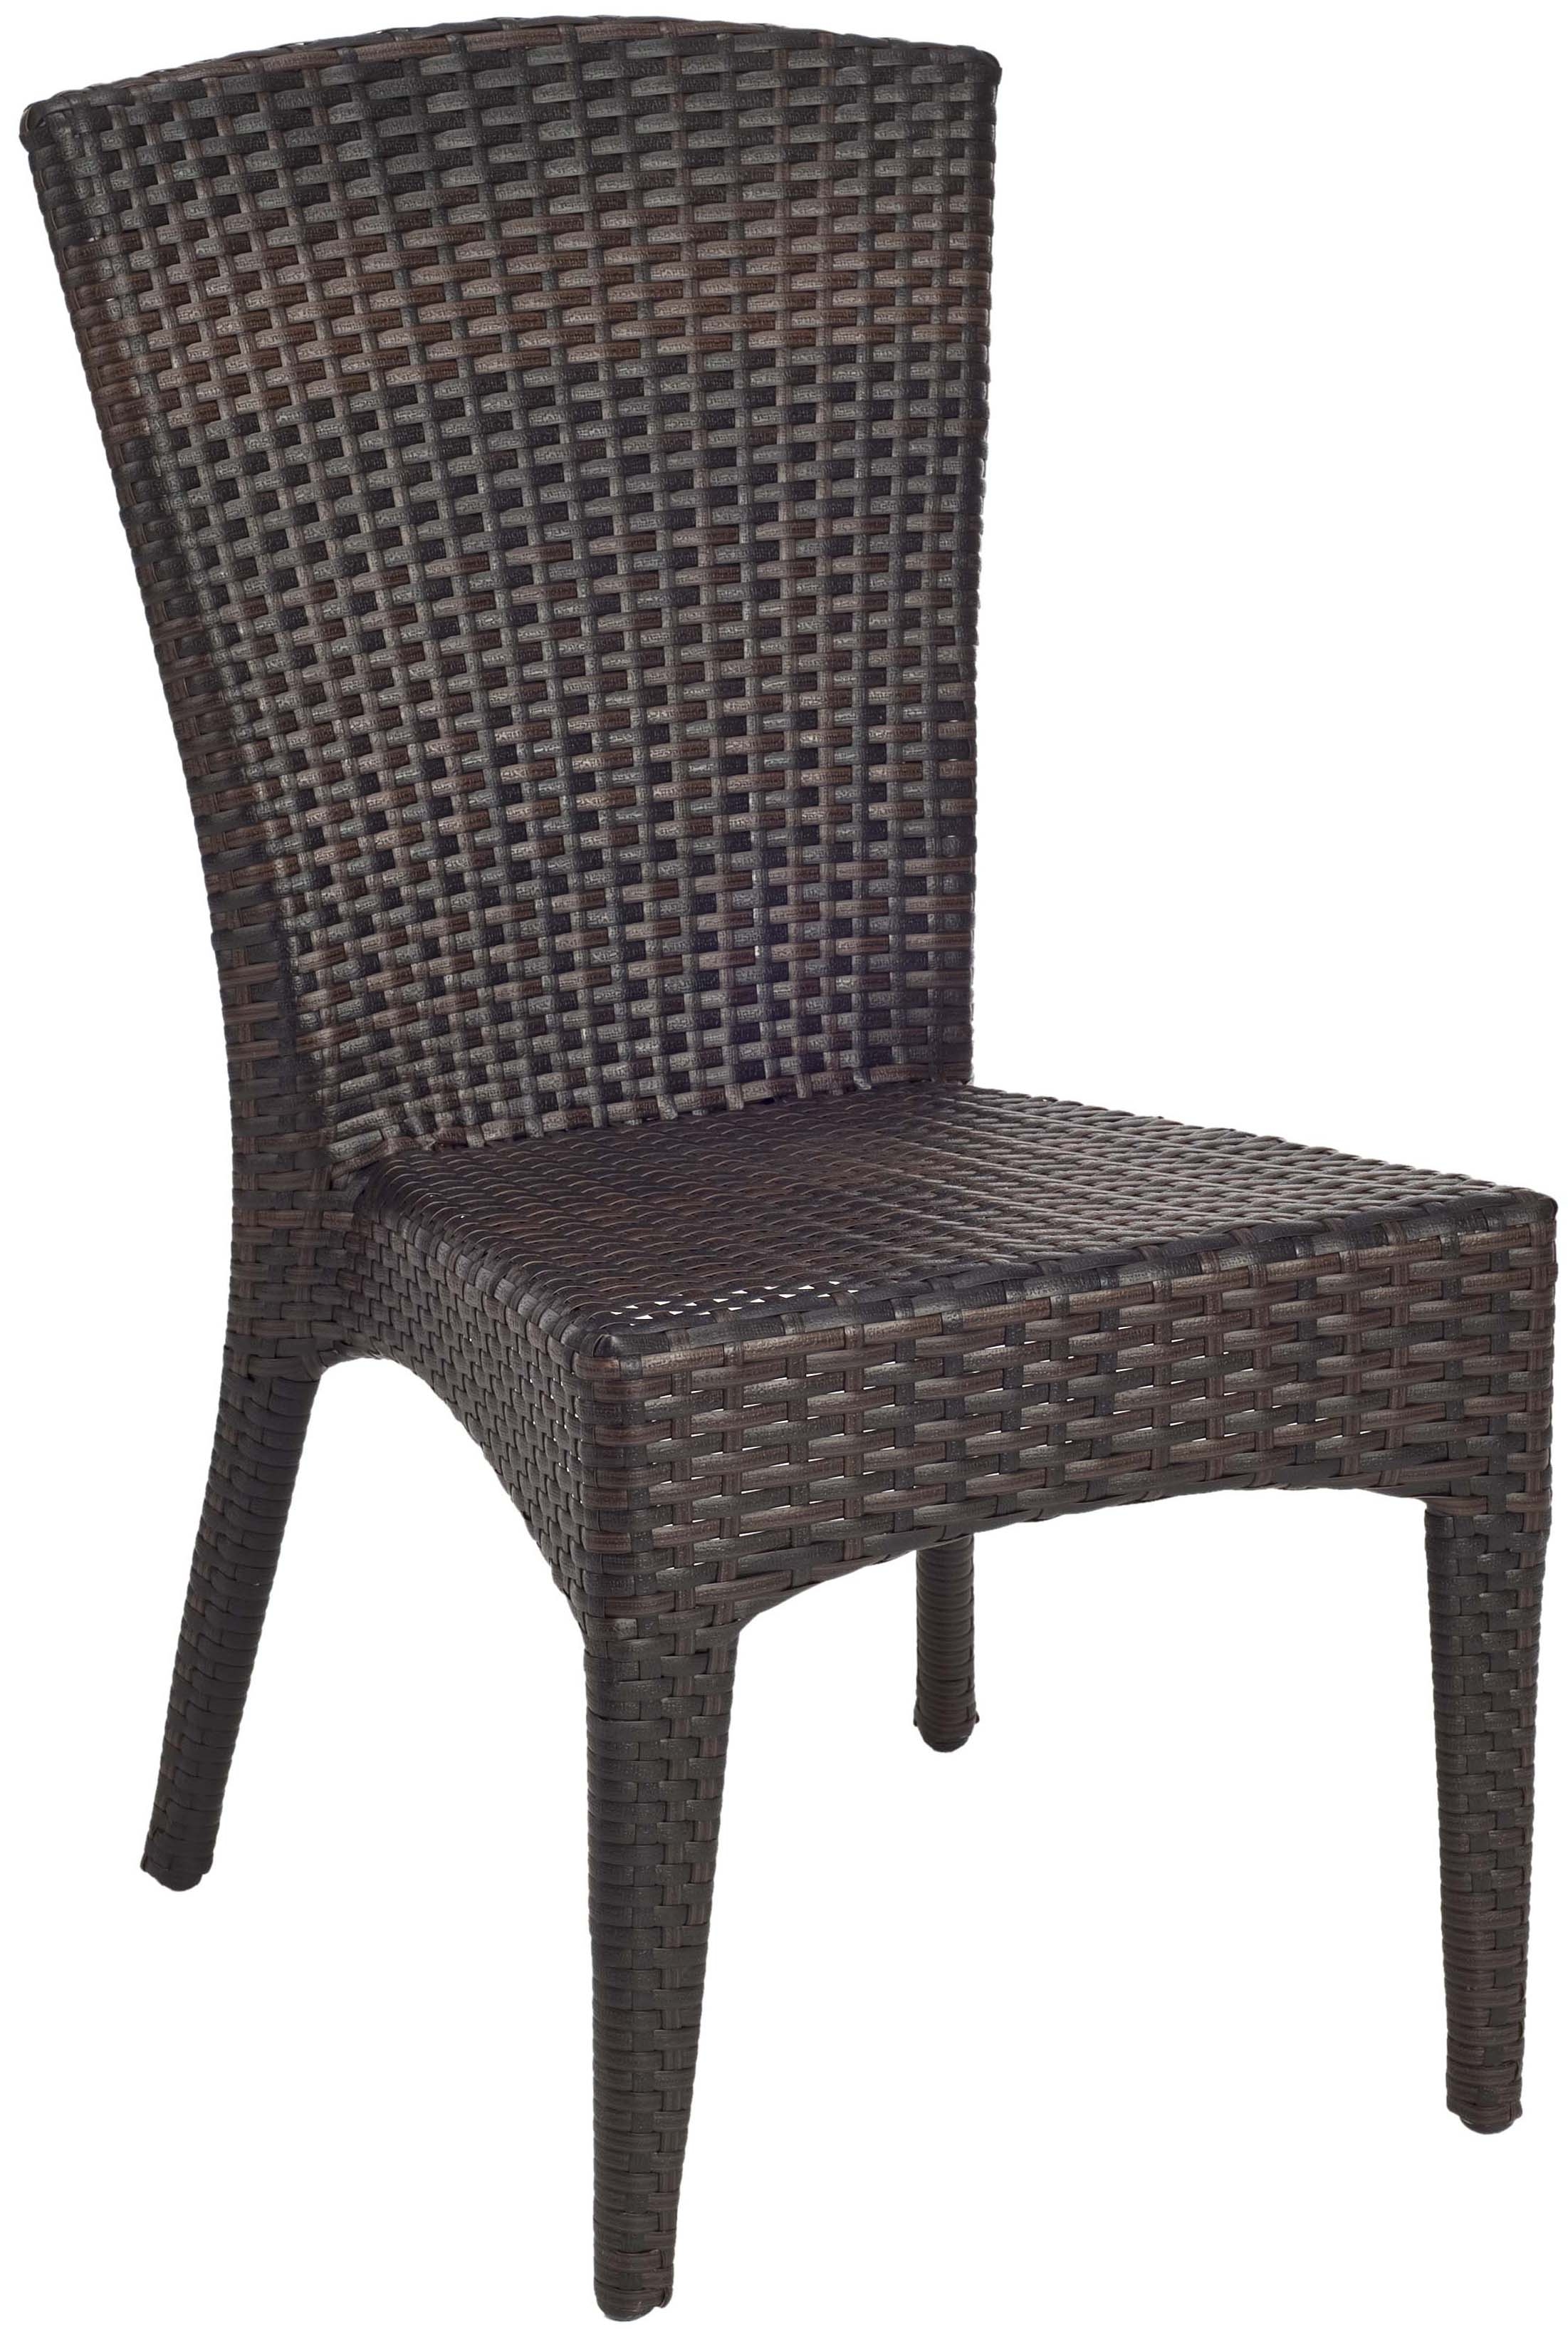 New Castle Wicker Side Chair - Black/Brown - Arlo Home - Image 2